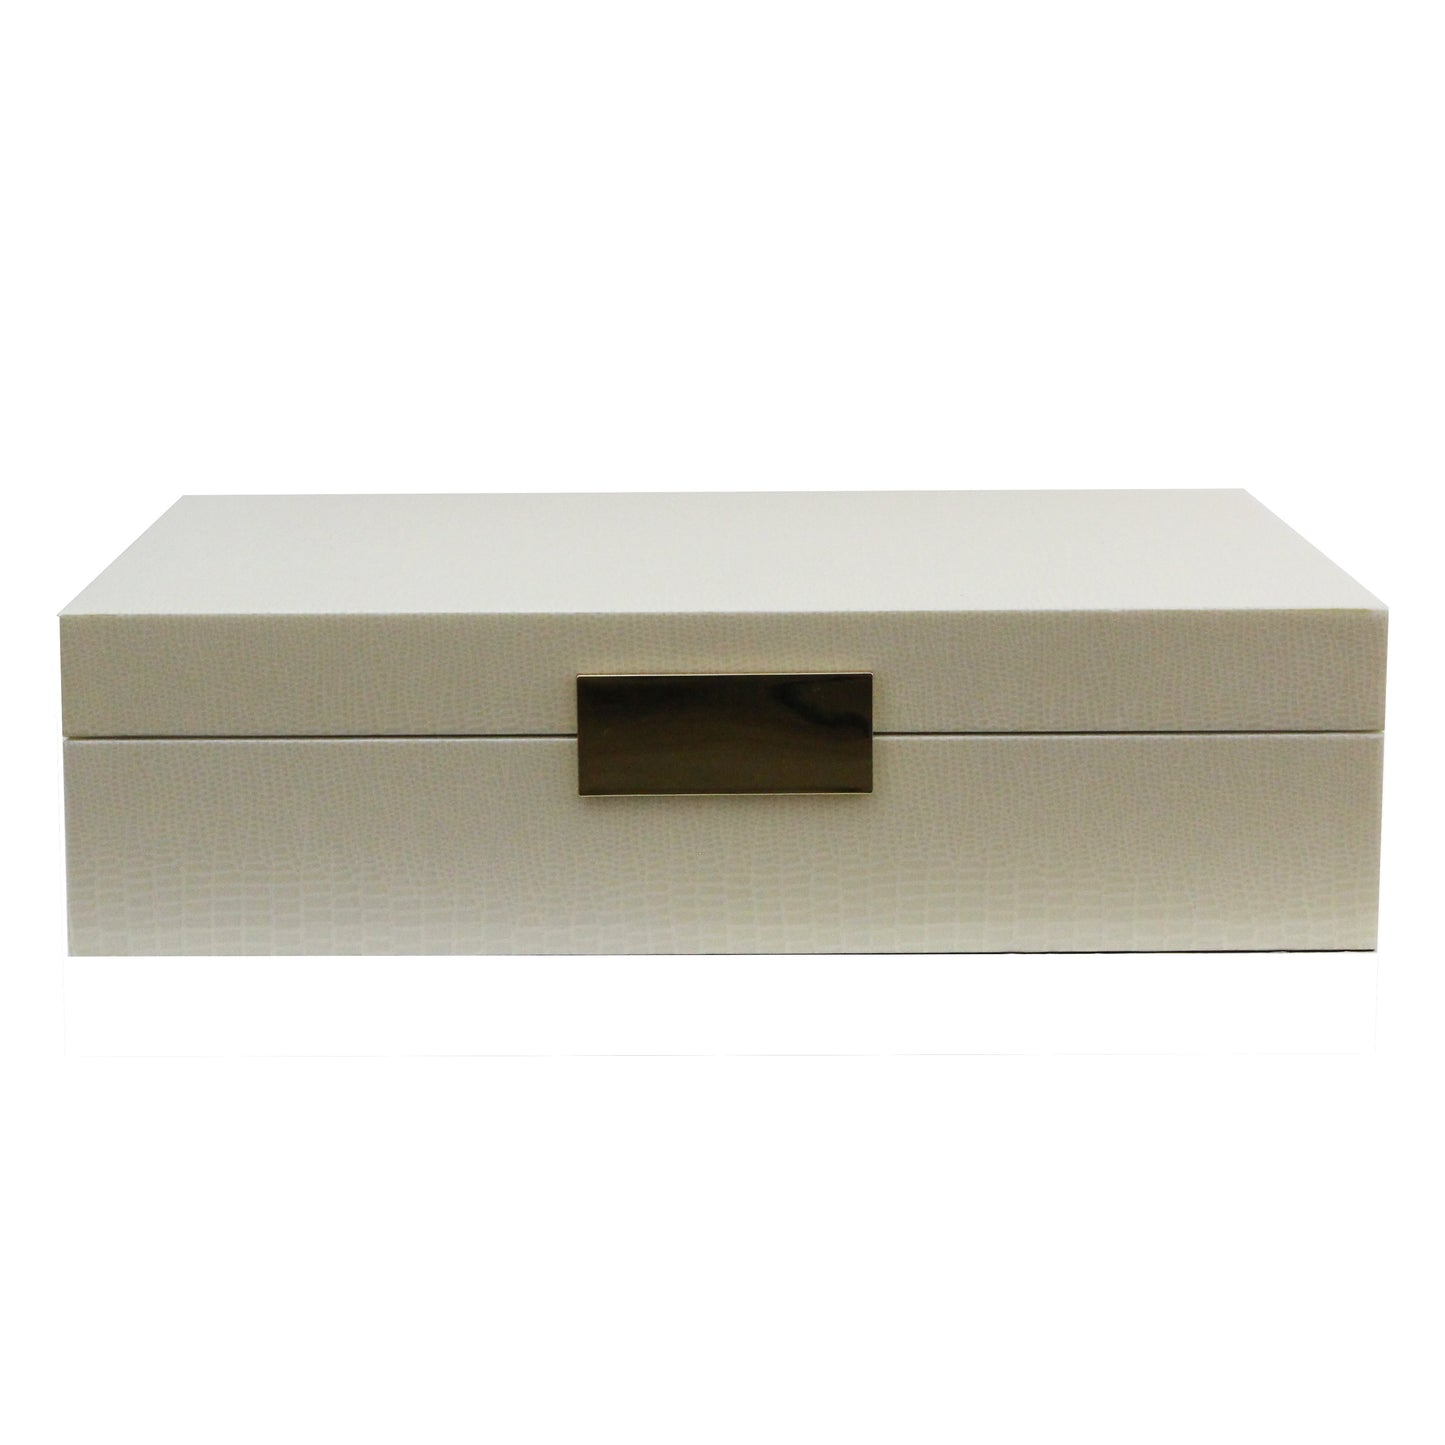 Large cream storage box with gold plated clasp